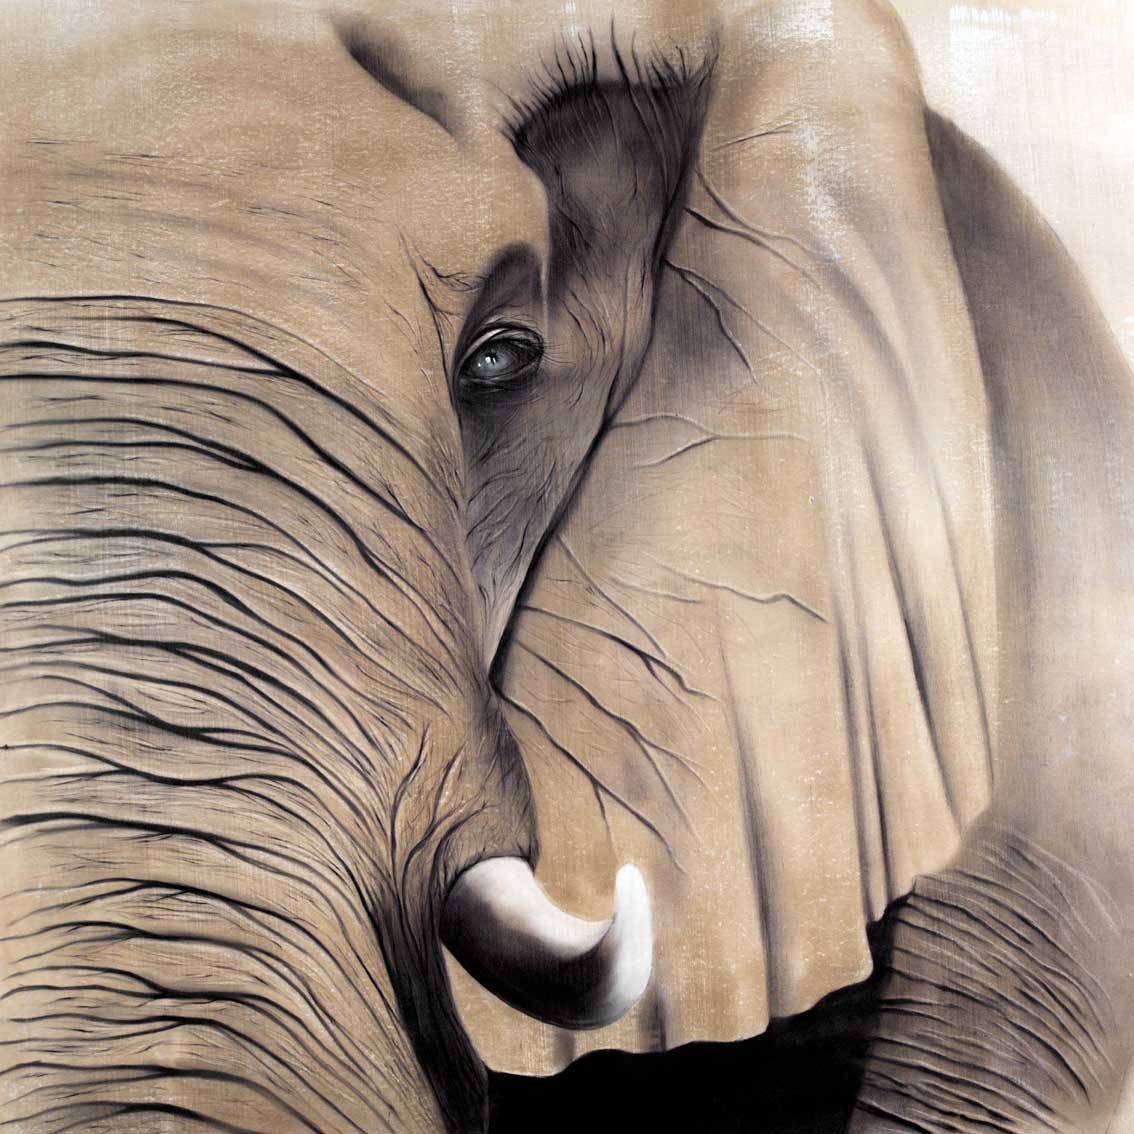 Elephant 2 elephant Thierry Bisch Contemporary painter animals painting art decoration nature biodiversity conservation